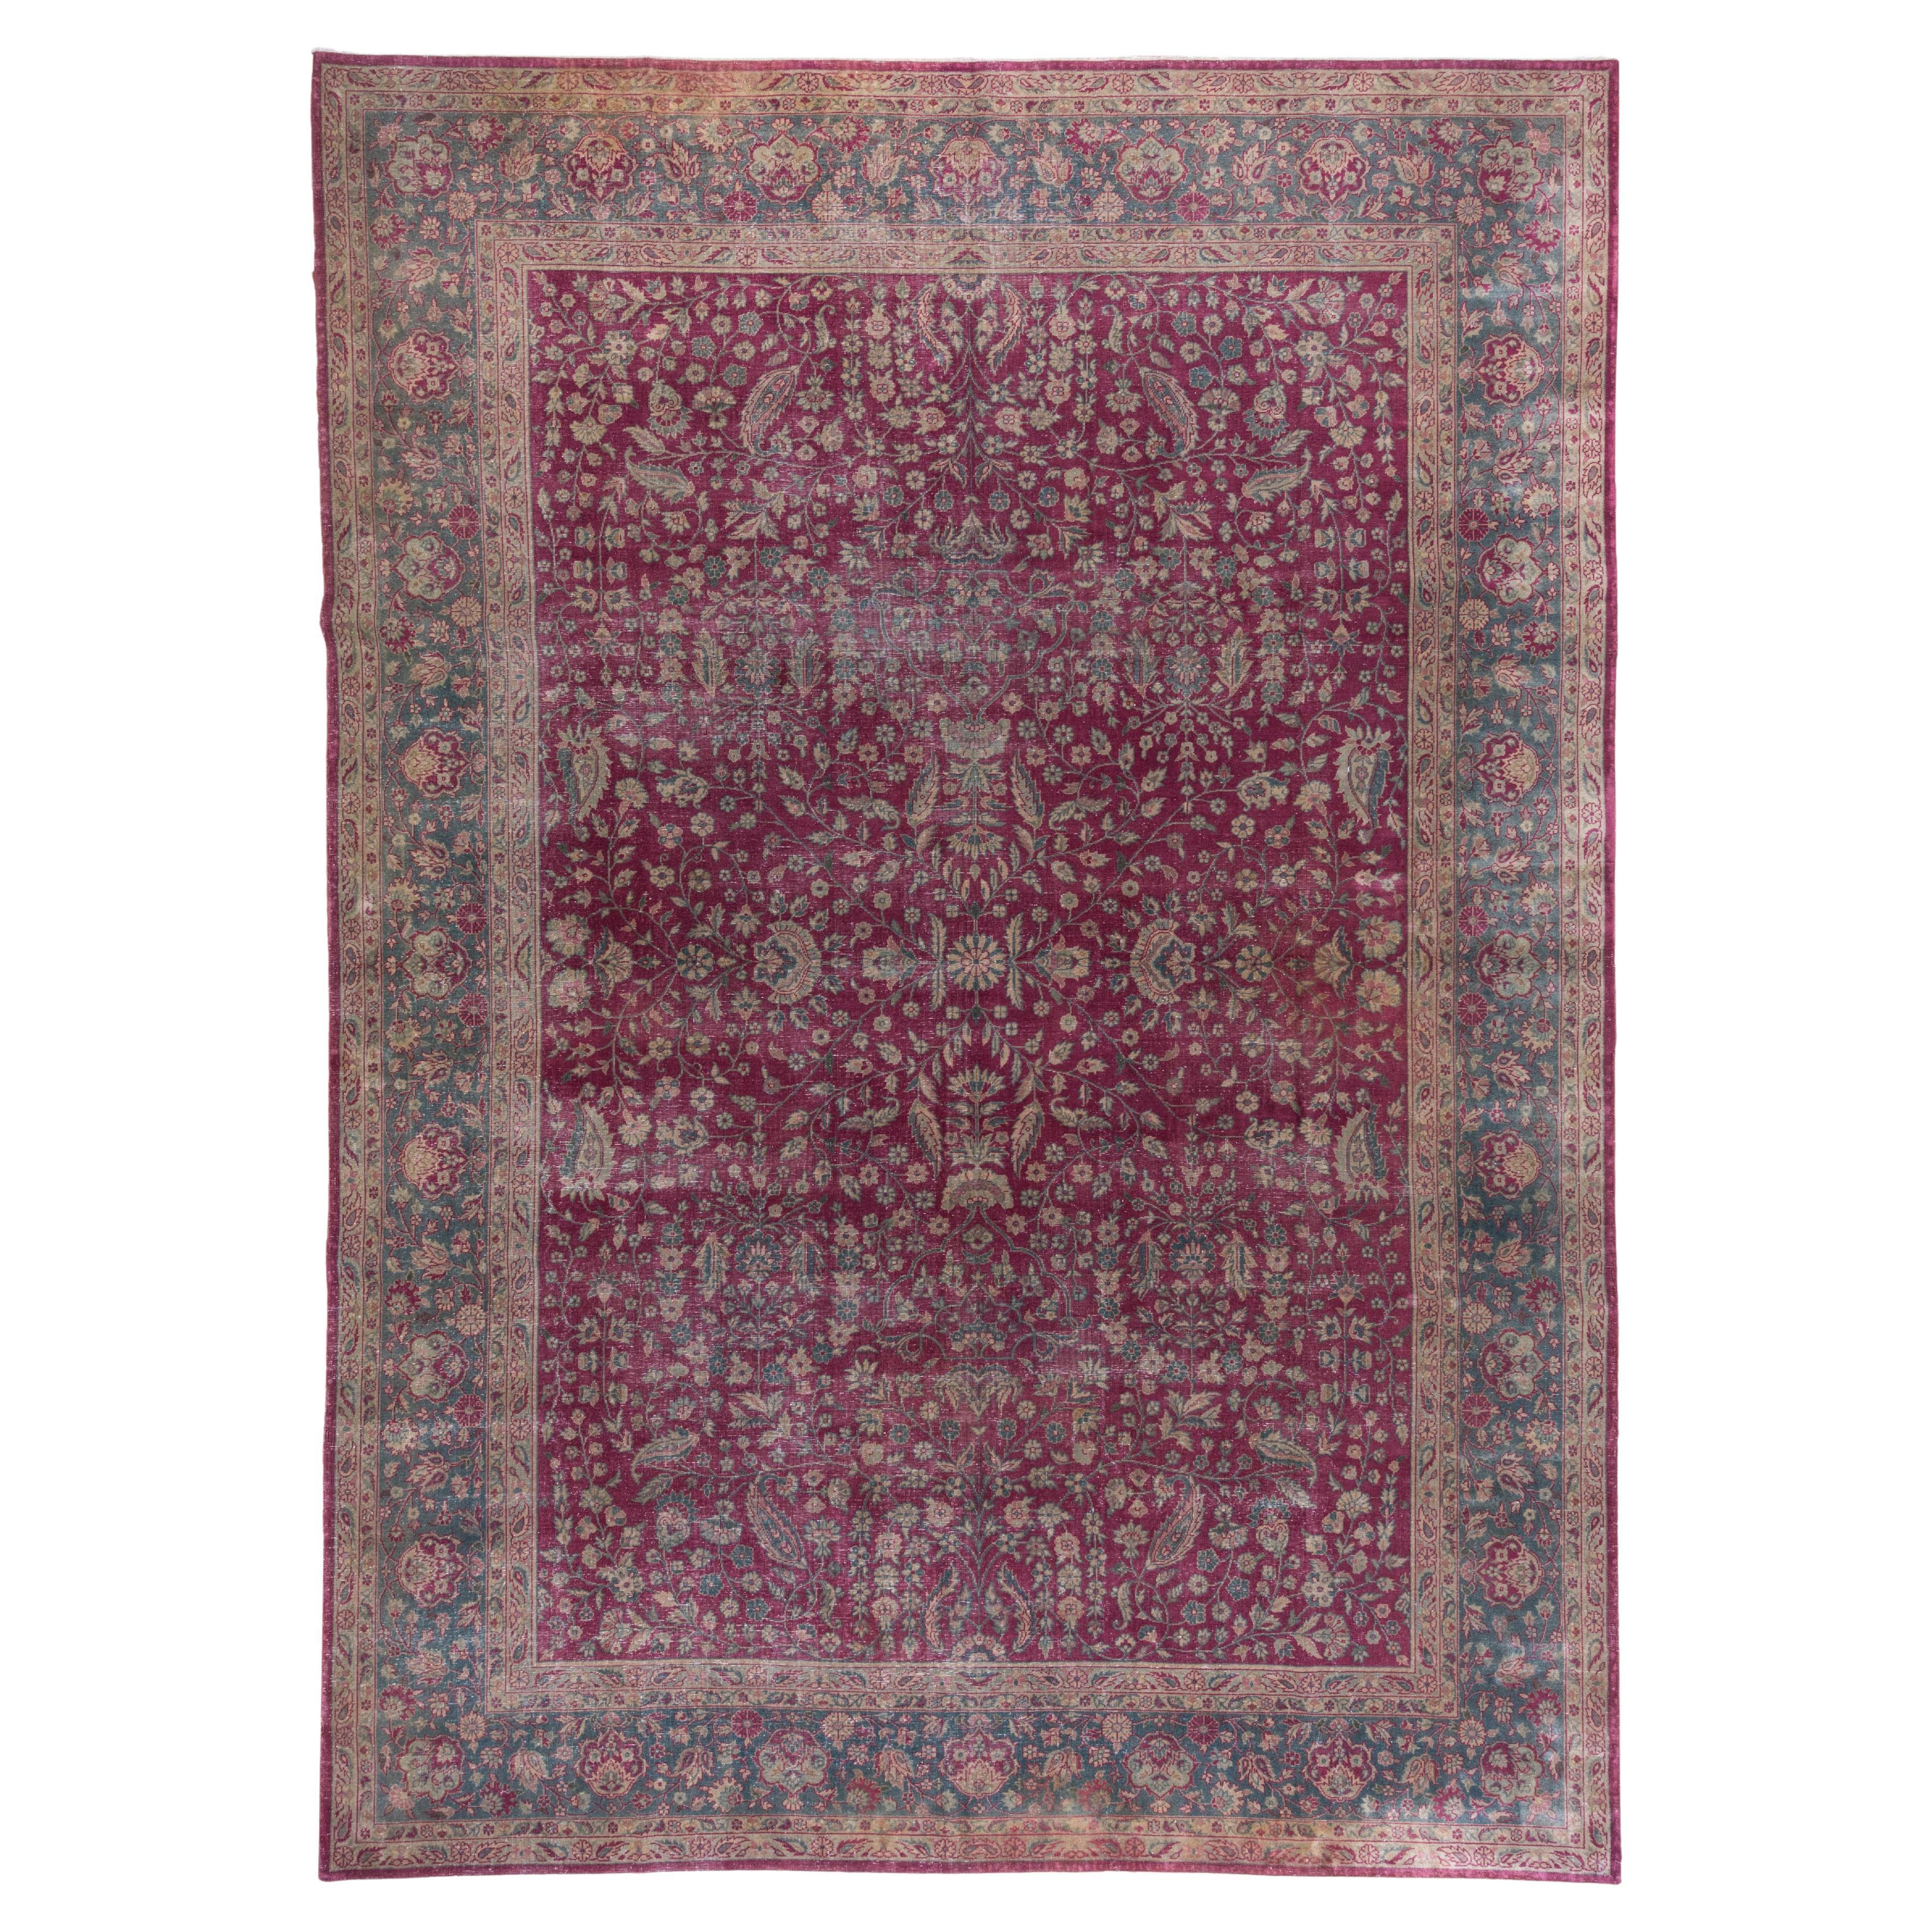 Antique Turkish Sivas Rug, Raspberry Red Field, Teal Borders, Circa 1930s For Sale